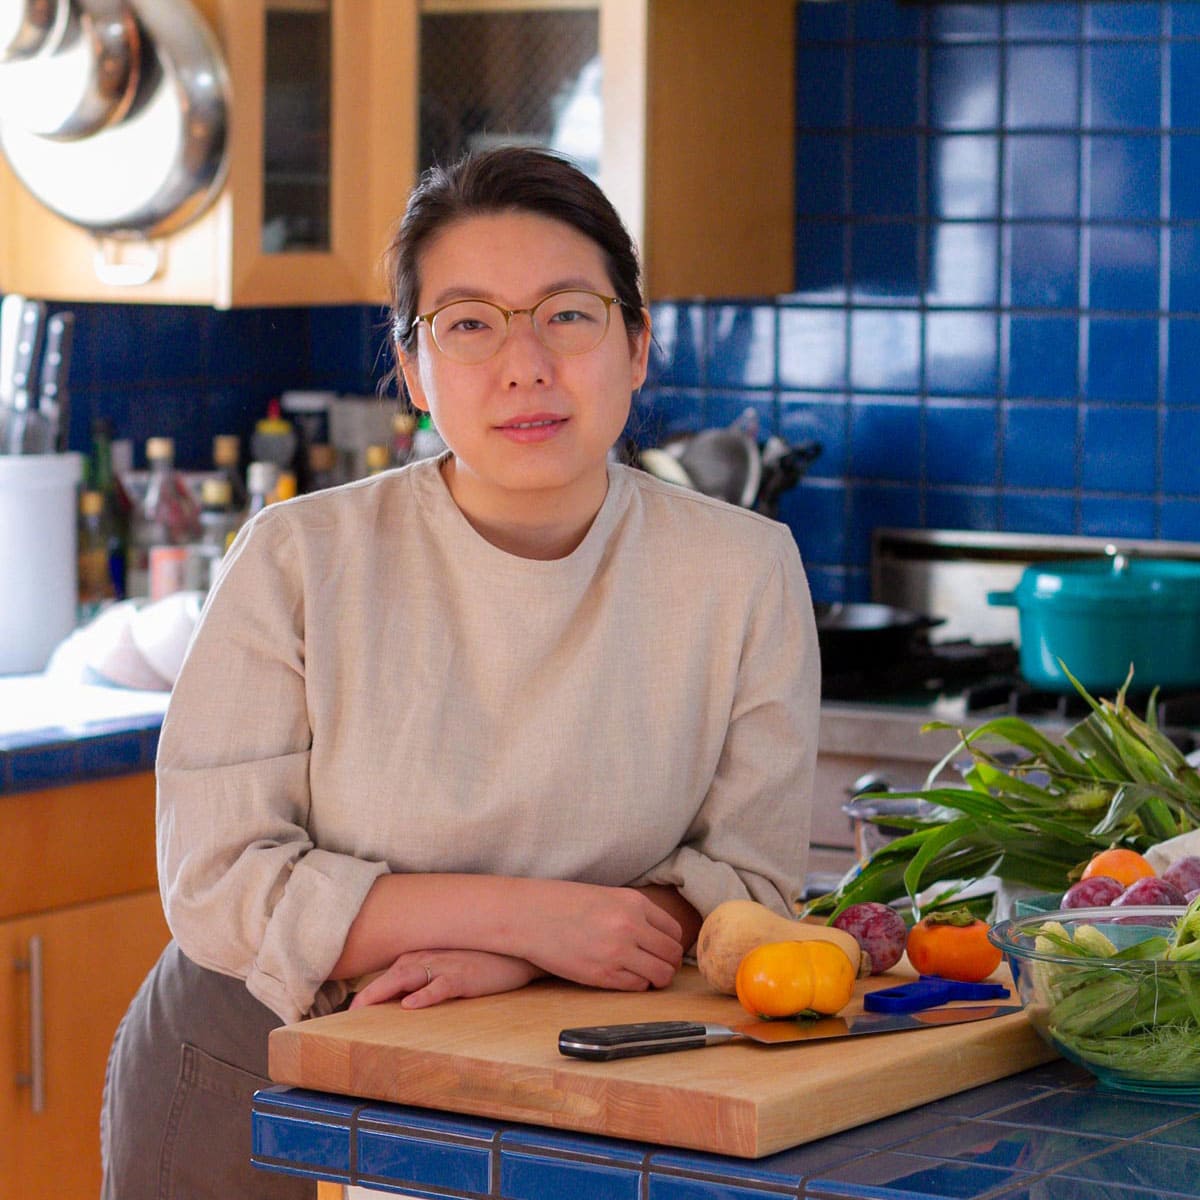 Cindy smiling while wearing a beige shirt and gray apron, leaning on a cutting board surrounding by fall produce.